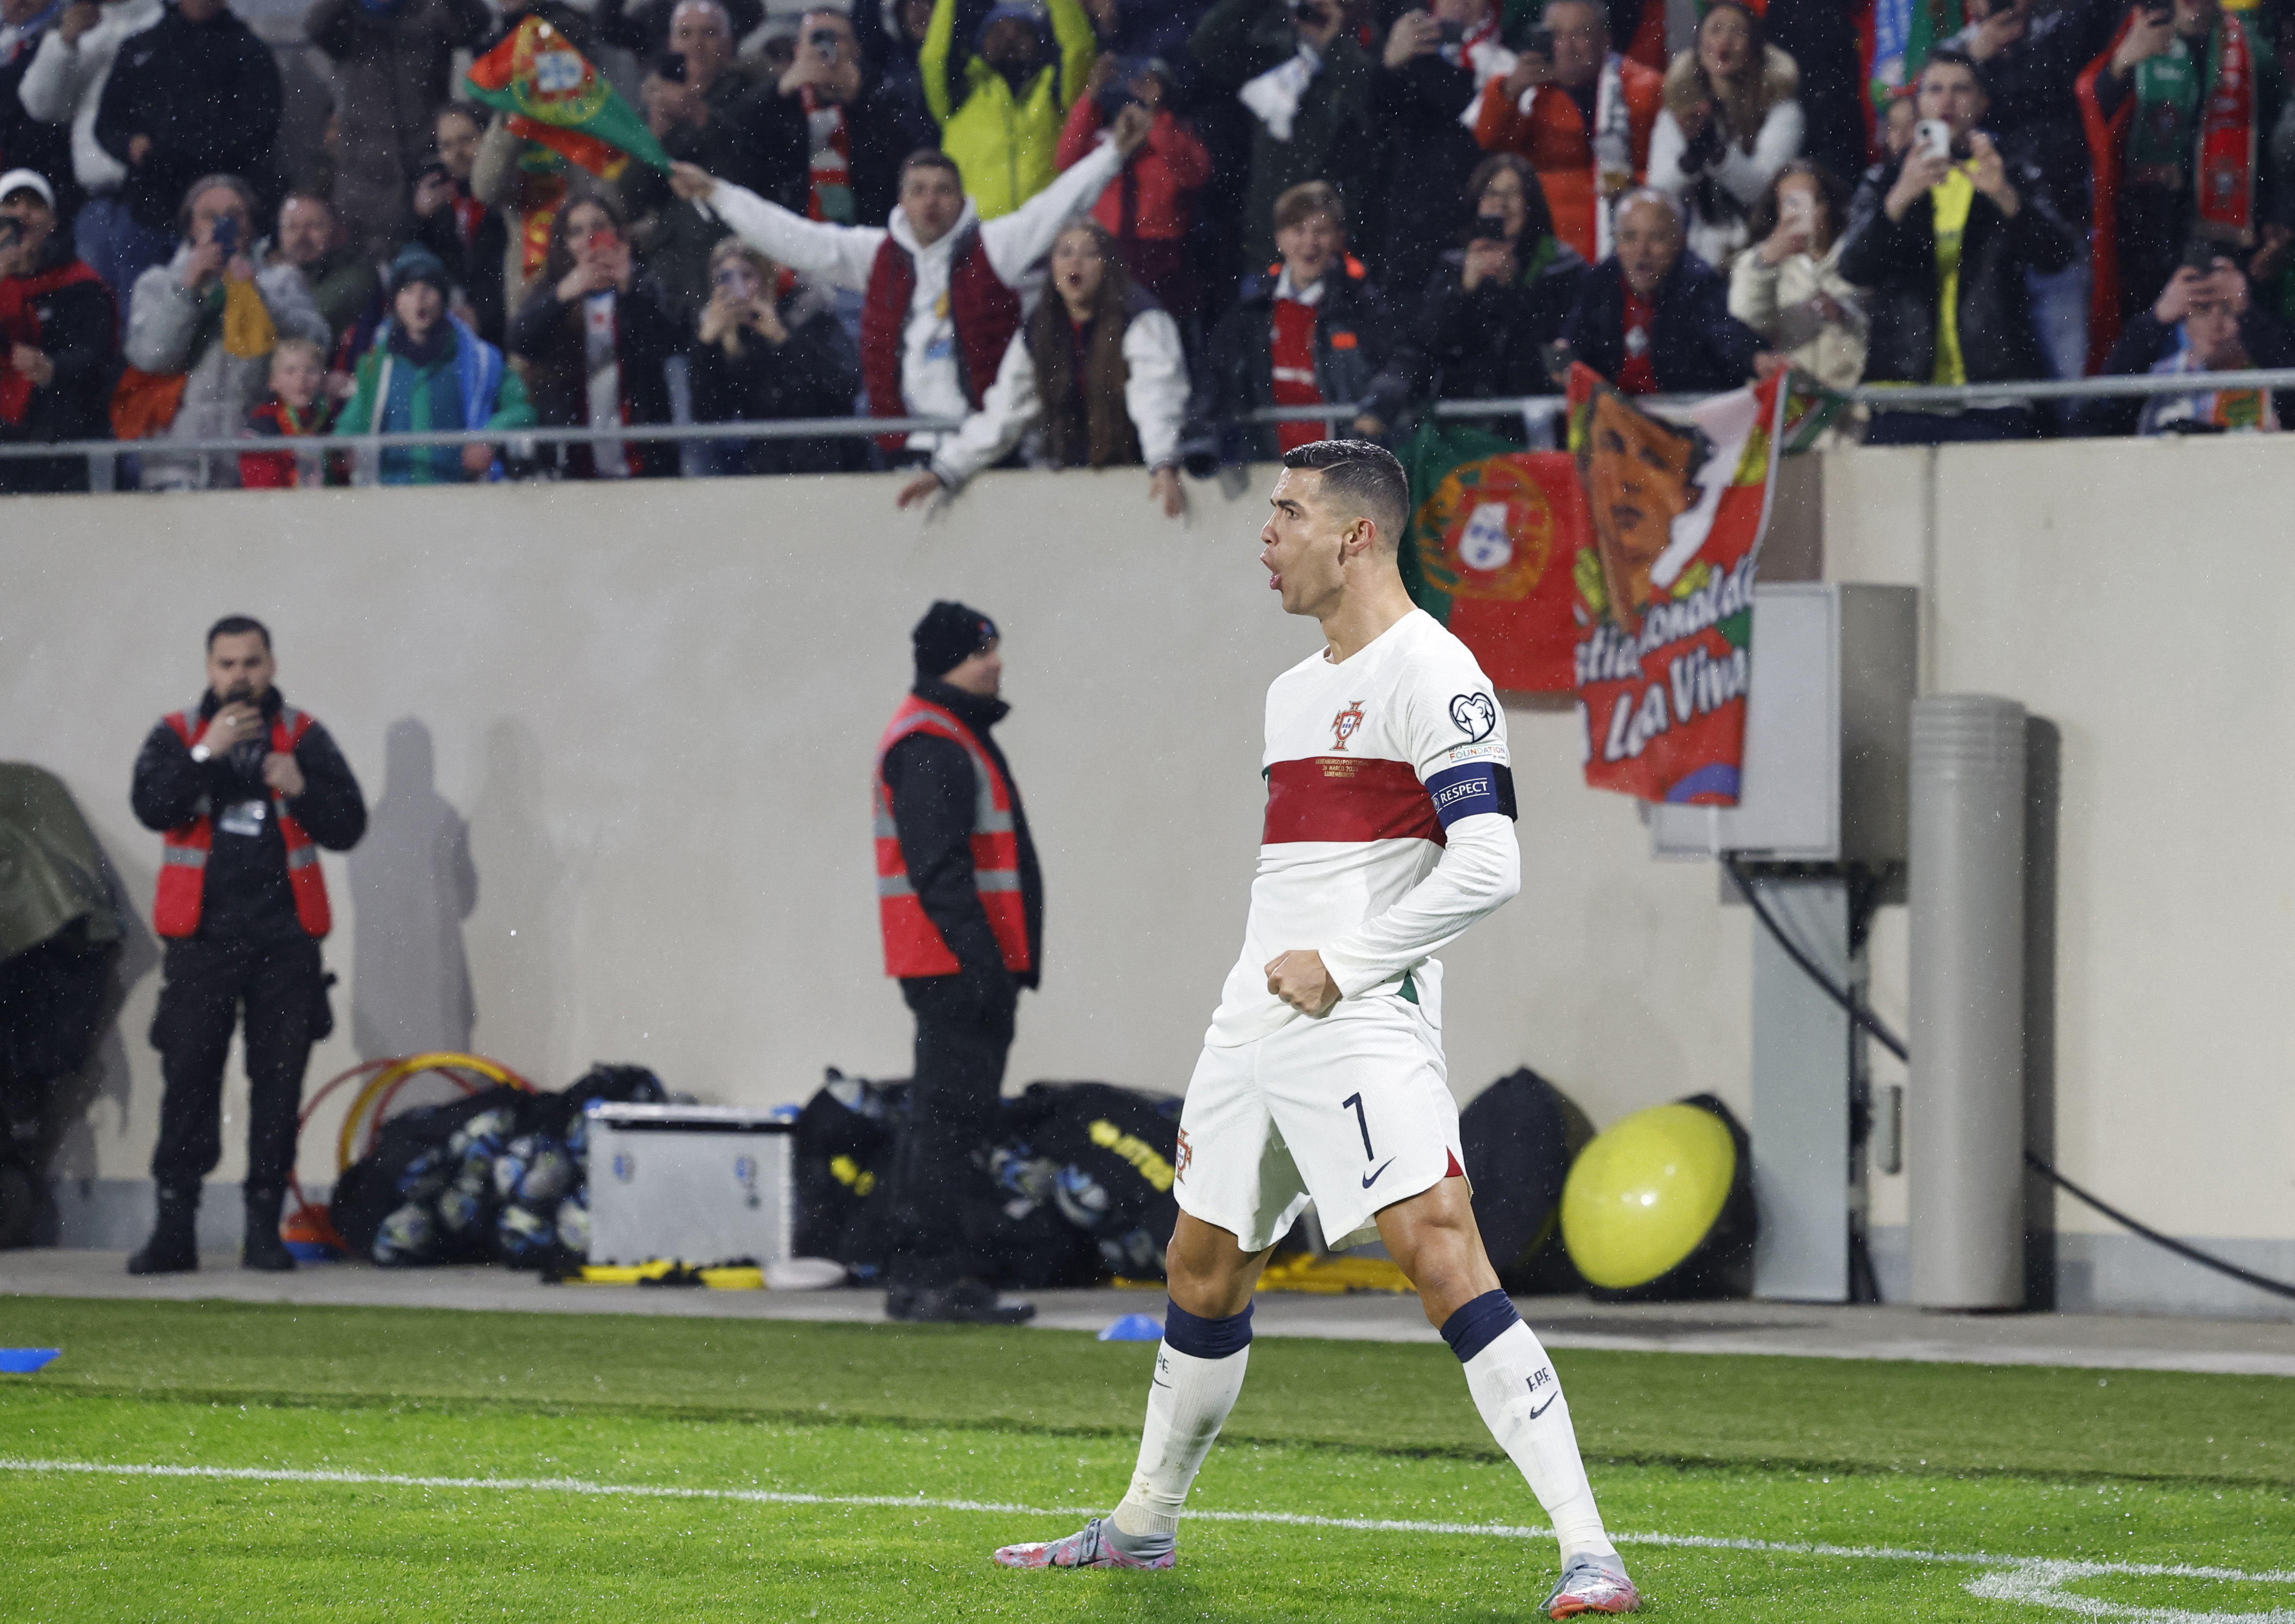 Soccer Football - UEFA Euro 2024 Qualifiers - Group J - Luxembourg v Portugal - Luxembourg Stadium, Luxembourg City, Luxembourg - March 26, 2023 Portugal's Cristiano Ronaldo celebrates scoring their fourth goal REUTERS/Piroschka Van De Wouw